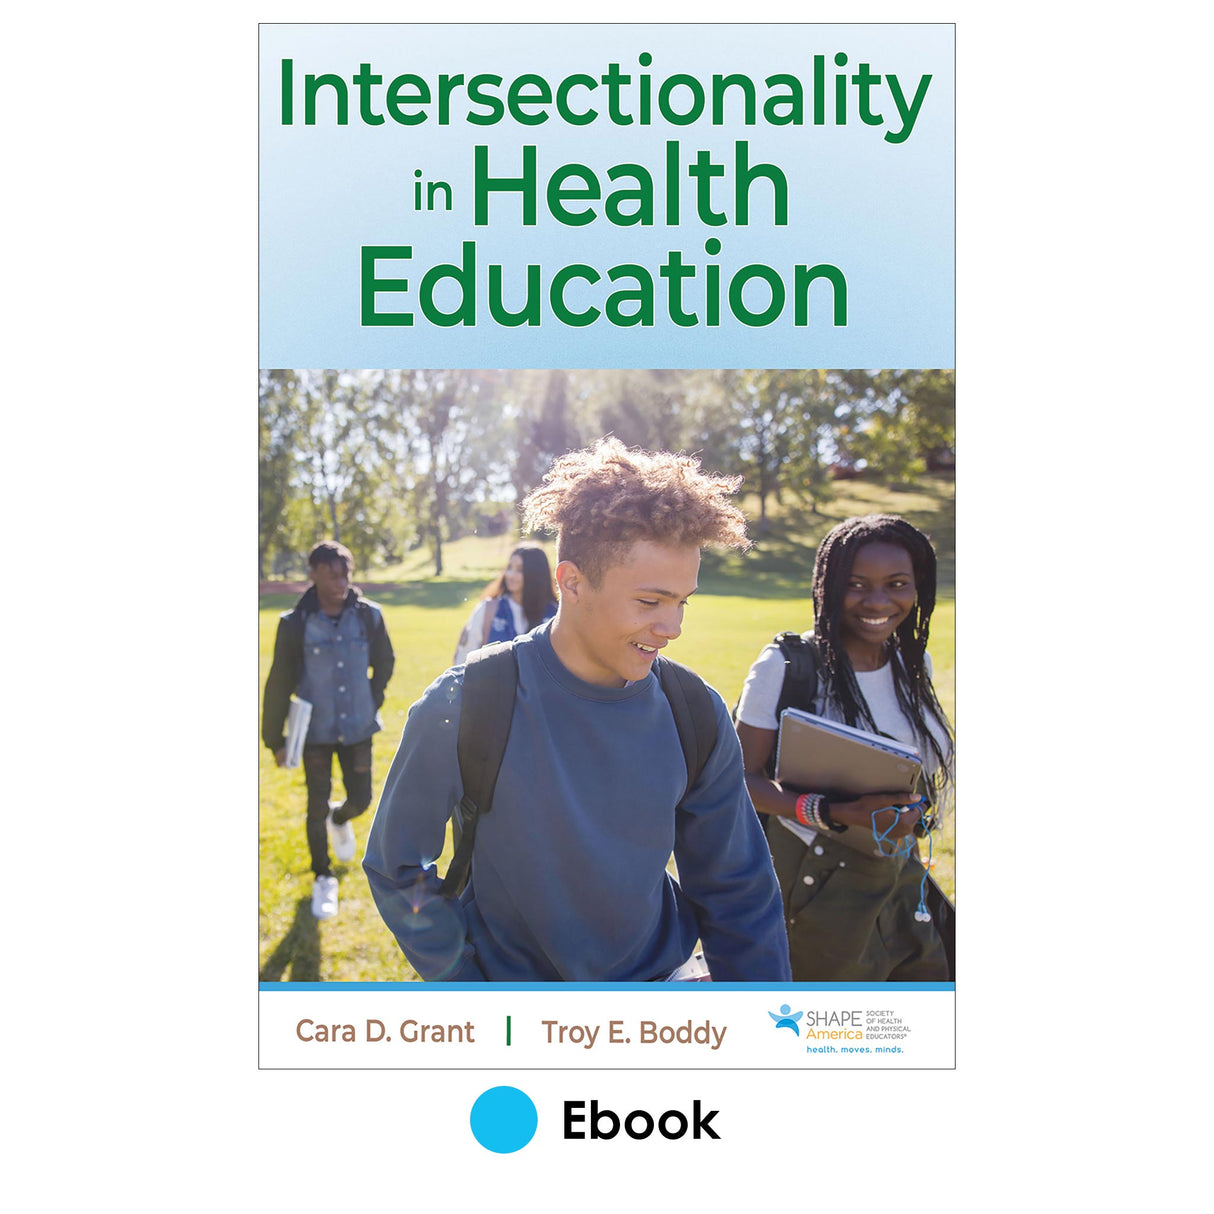 Intersectionality in Health Education epub